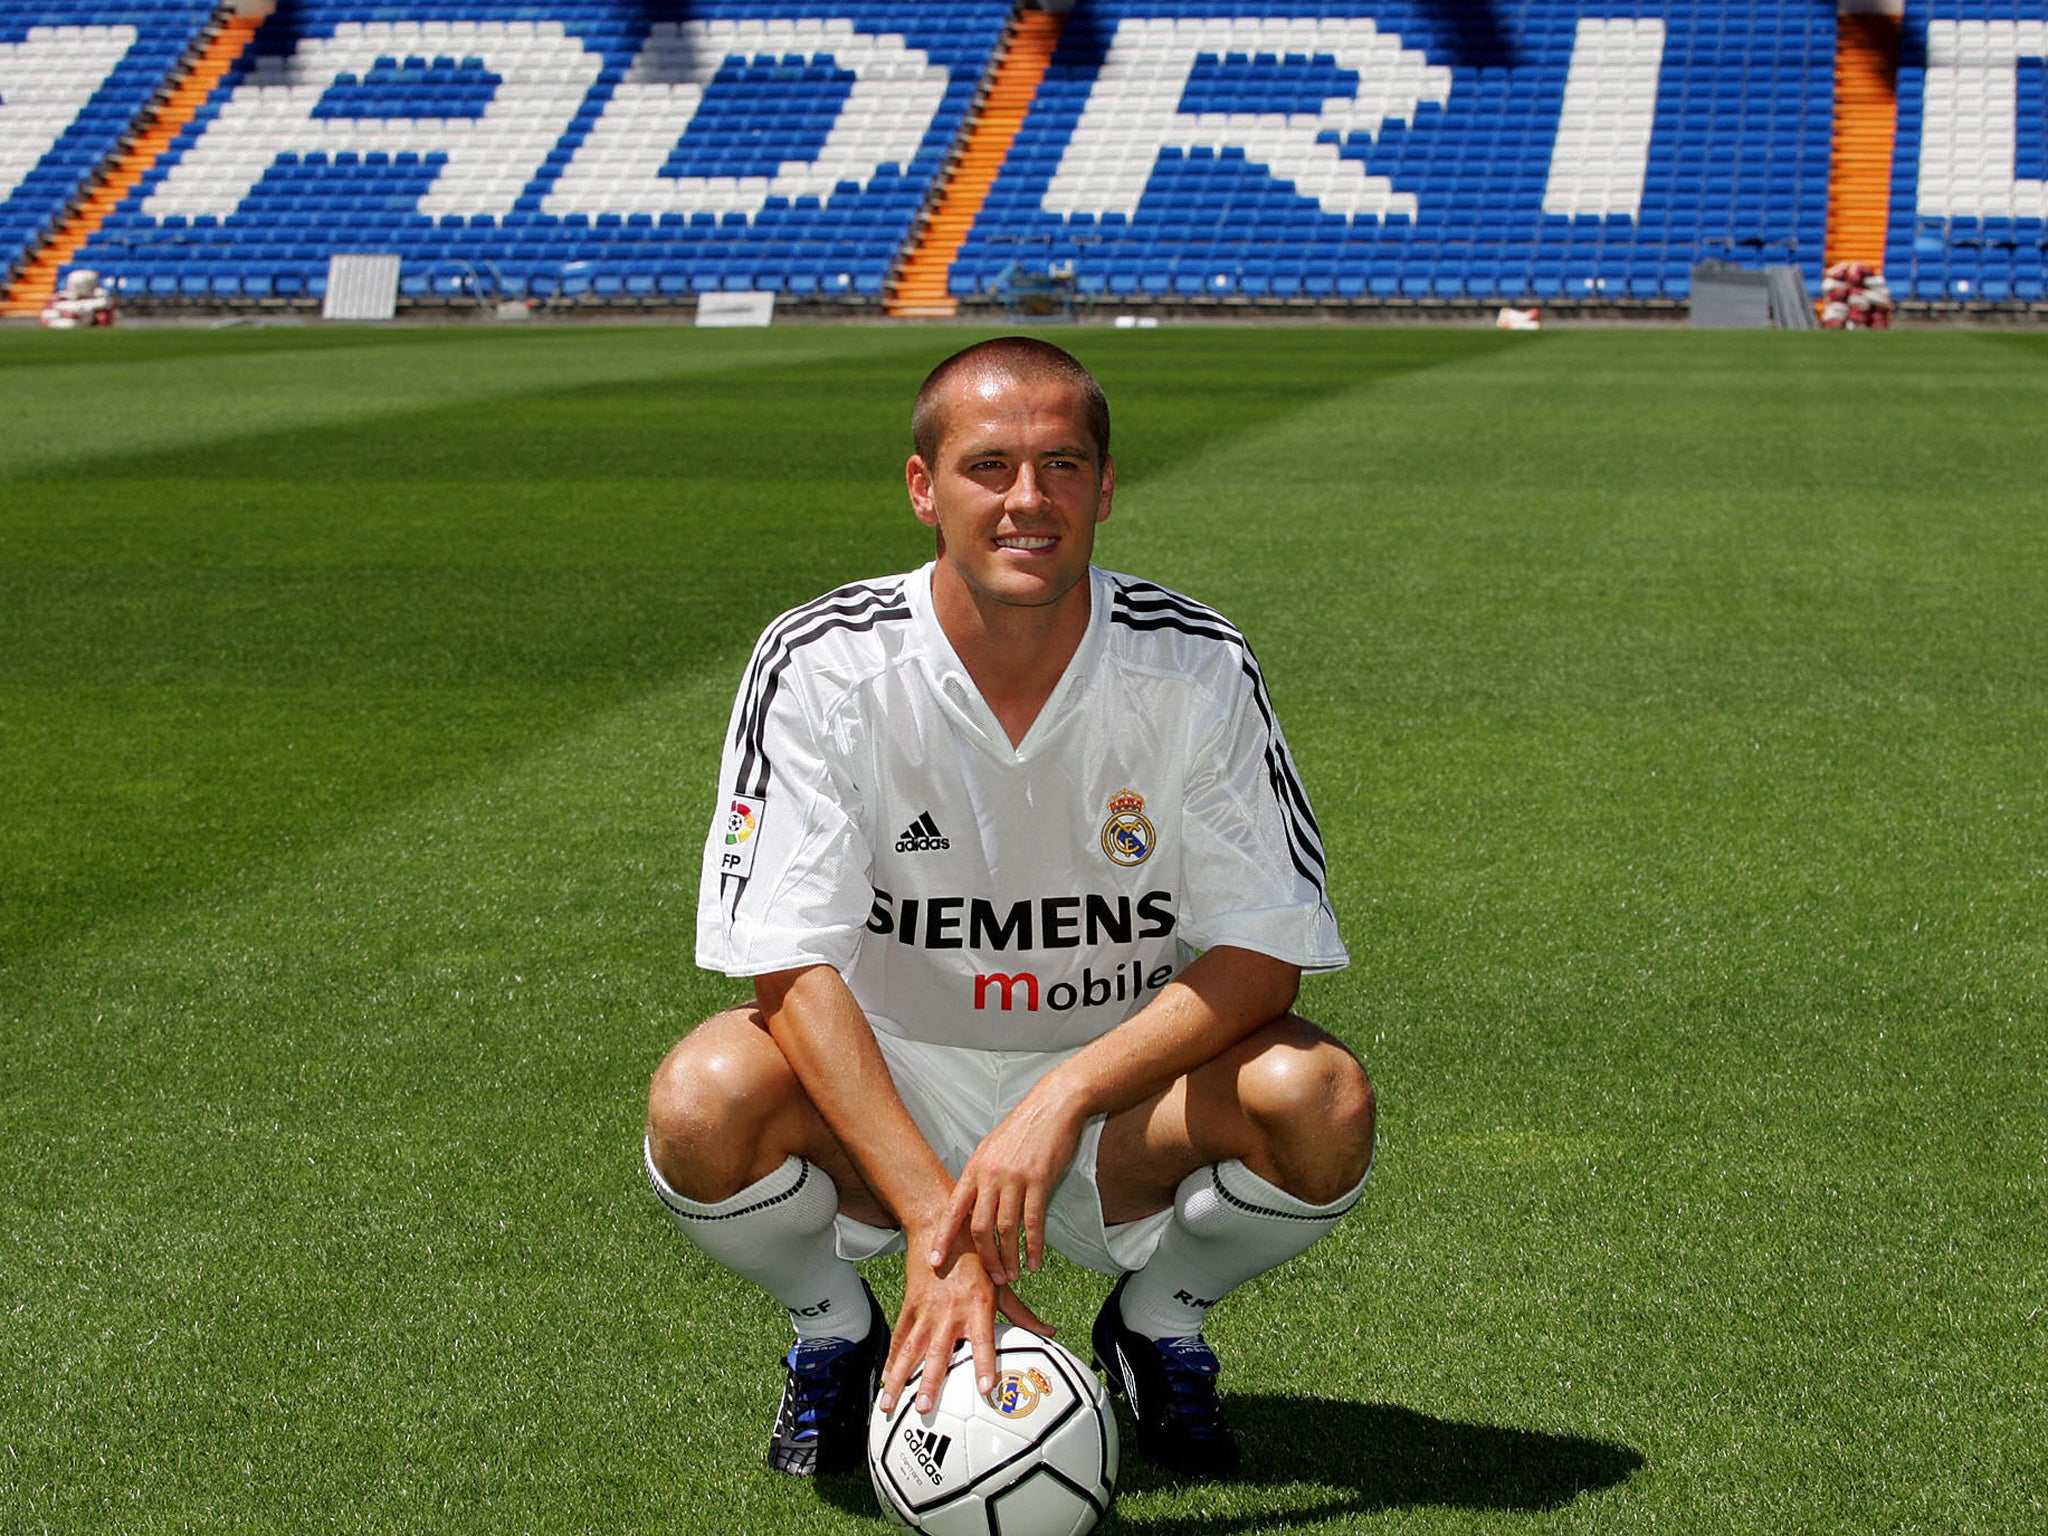 August, 2004: Spanish giants Real Madrid agree £8m deal to sign Owen with Antonio Núñez moving to Liverpool